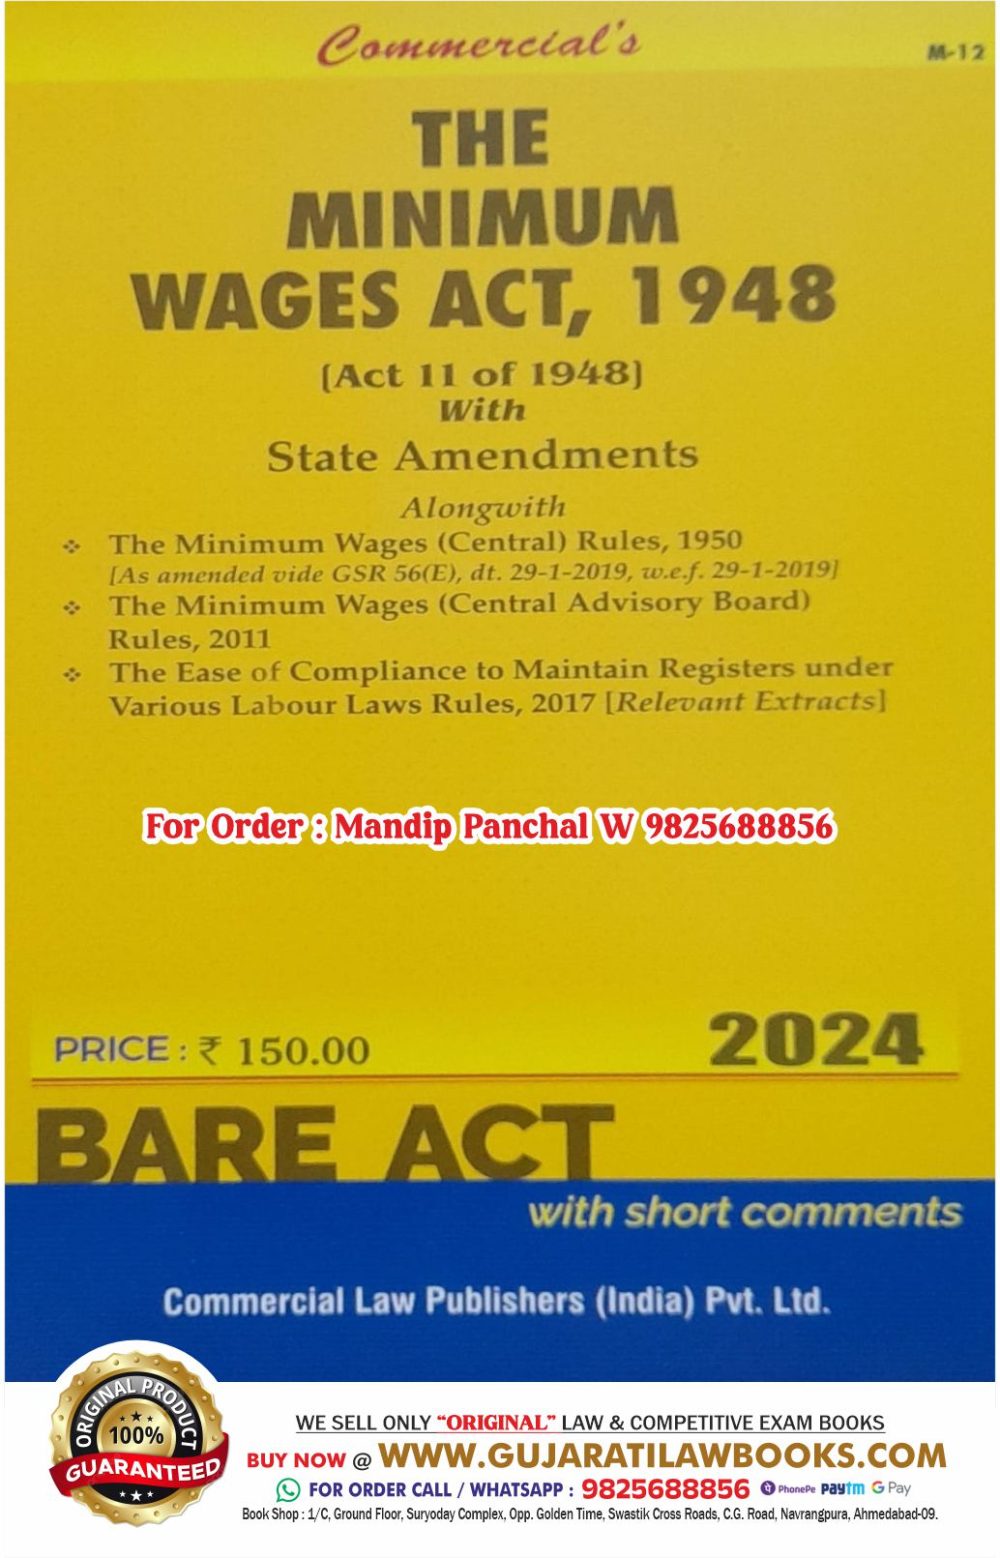 Minimum Wages Act, 1948 - BARE ACT - Latest 2024 Edition Commercial